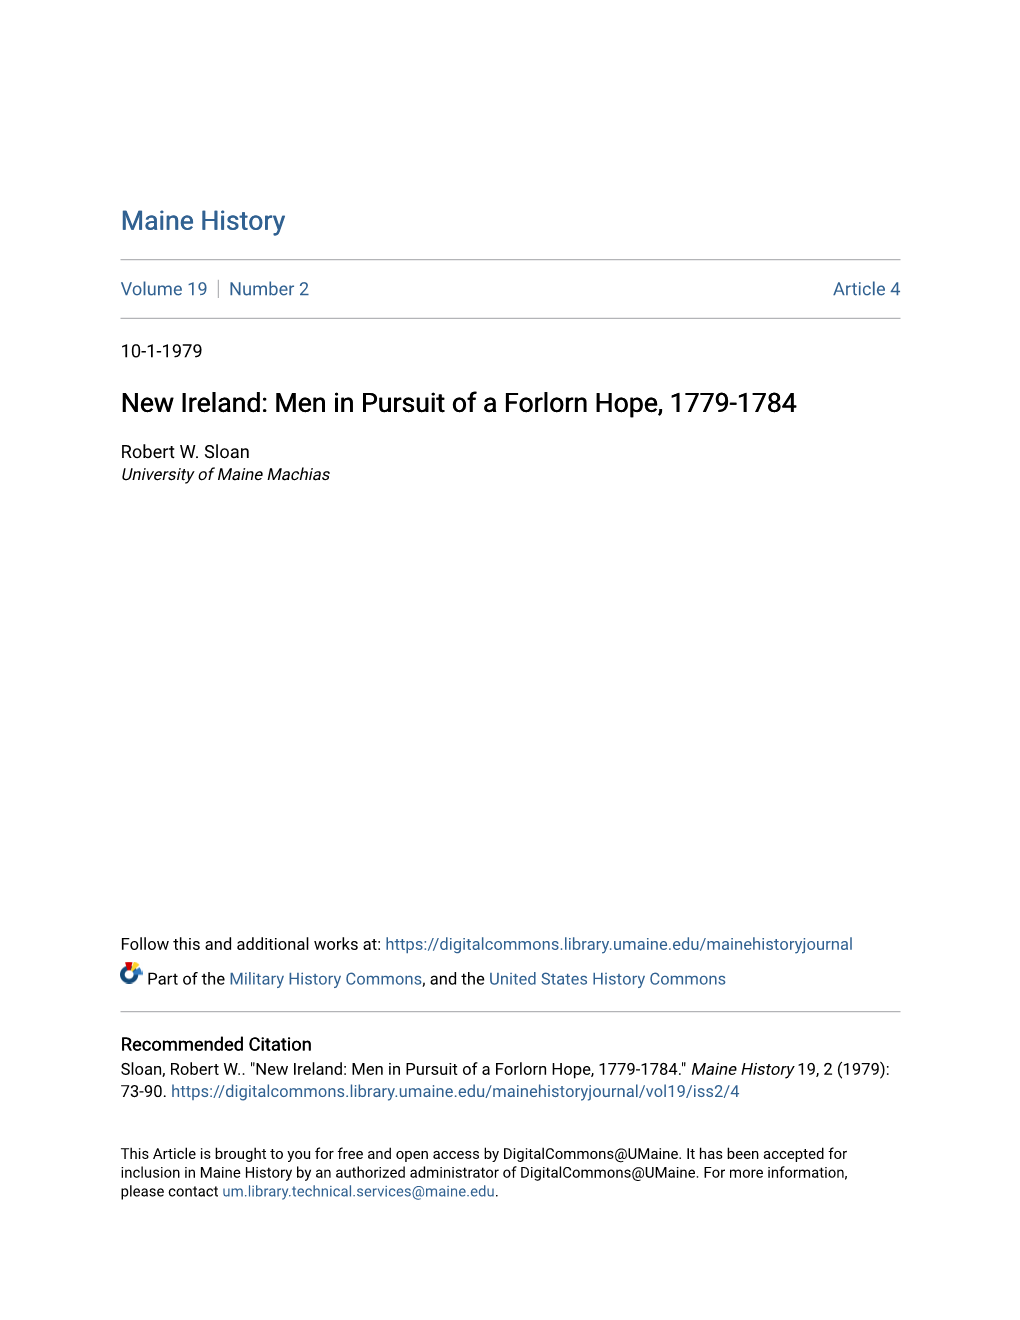 New Ireland: Men in Pursuit of a Forlorn Hope, 1779-1784